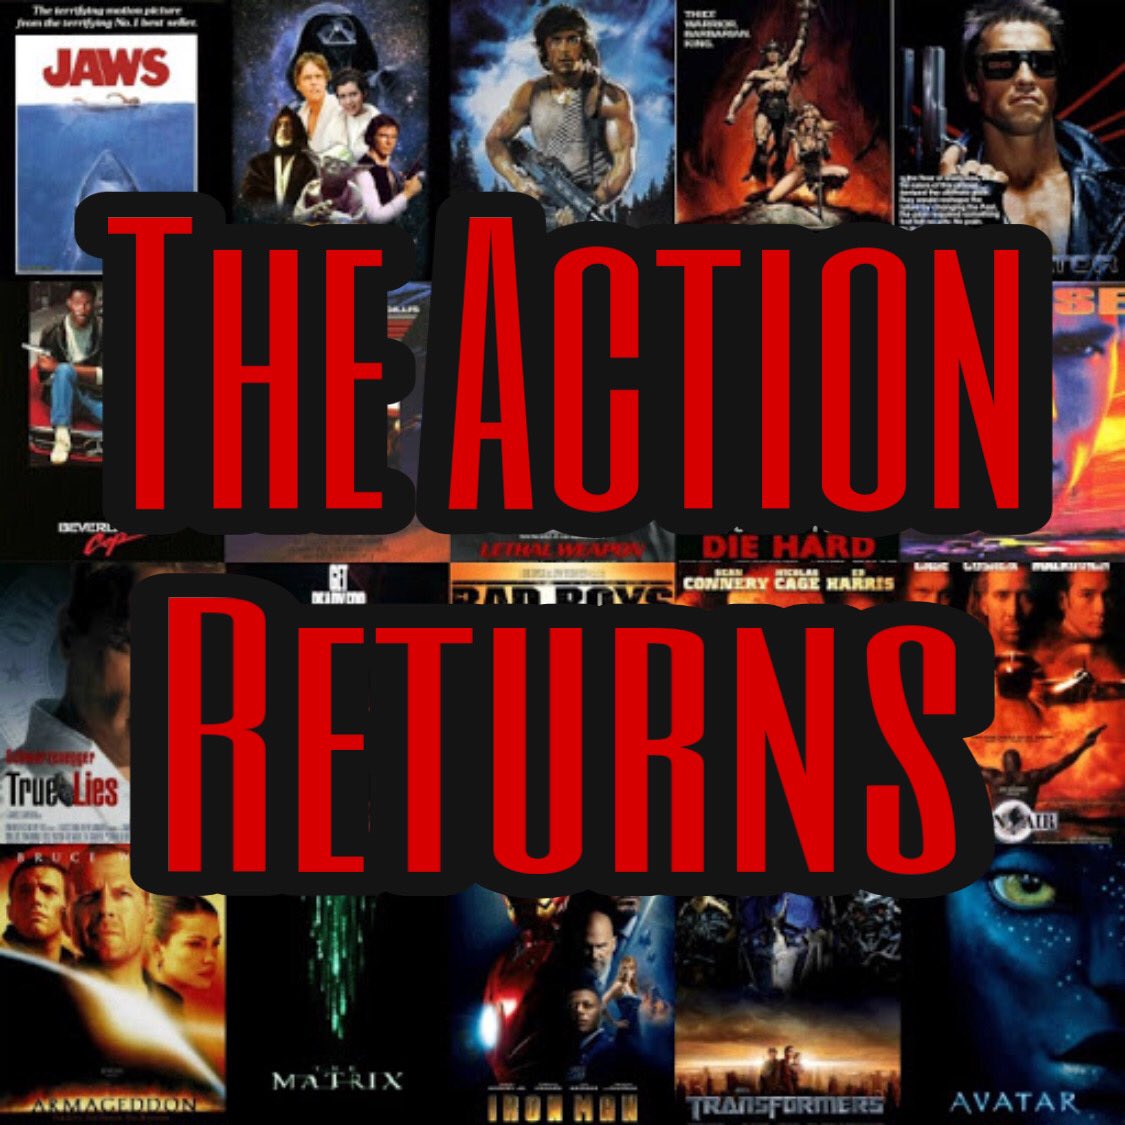 Subscribe & download to hear all of our new & past episodes of the @action_returns!

#TheActionReturns #TheHorrorReturns #THRPodcastNetwork #Action #ActionMovies #ActionSeries #Podcast #Podcasting #PodLife #PodernFamily #PodcastHQ #PodNation

pca.st/podcast/1765bb…